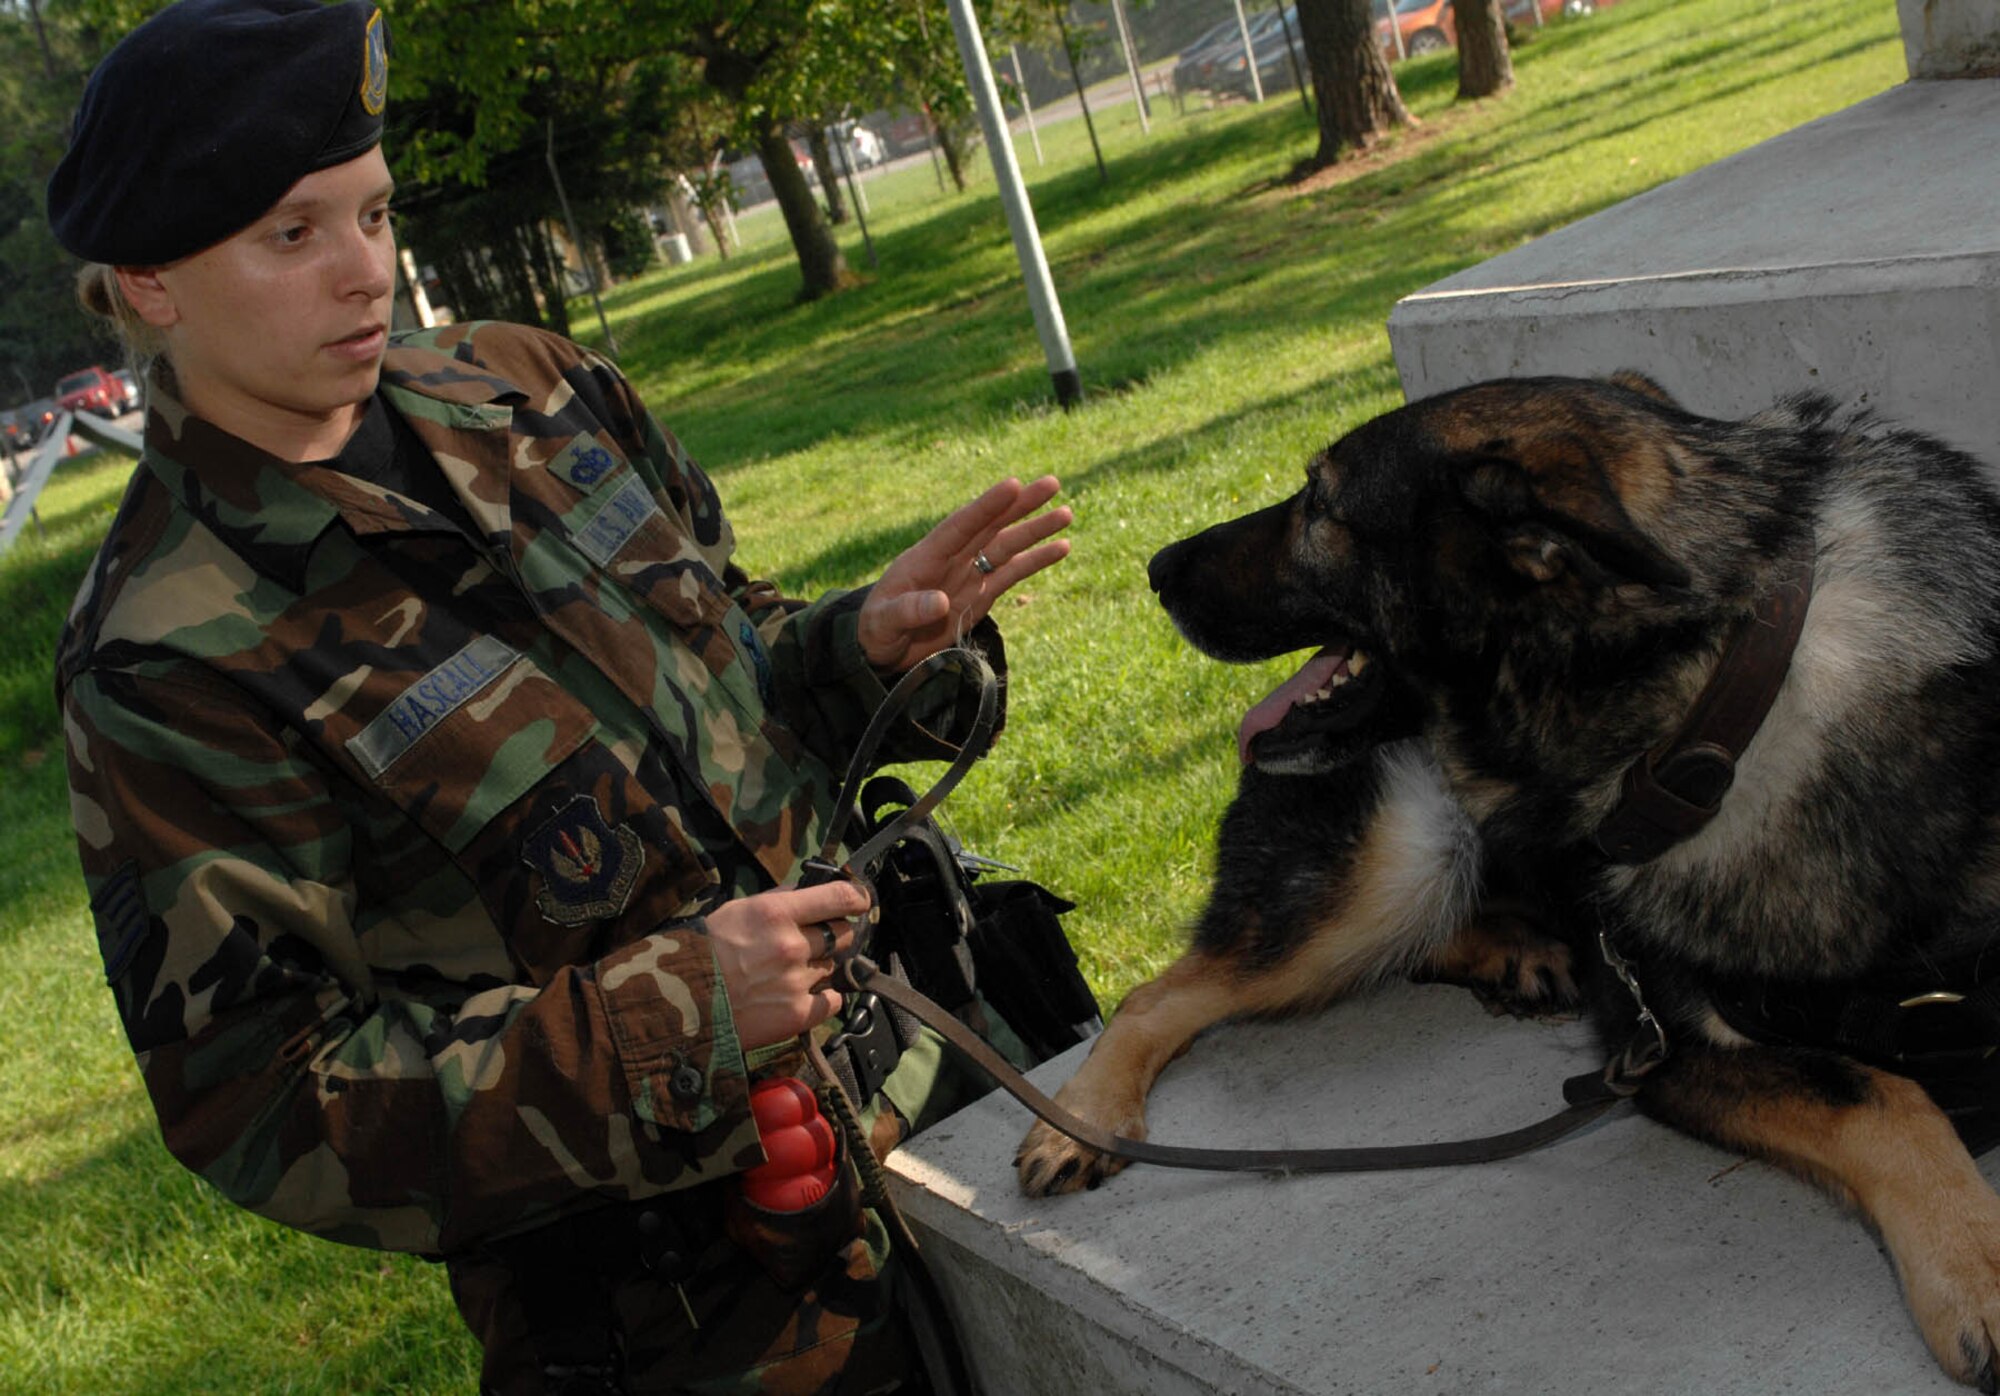 SPANGDAHLEM AIR BASE, GERMANY -- Staff Sgt. Patricia Hascall, 52nd Security Forces military working dog handler, trains MWD Agar, a German Sheppard, here May 22, 2007. German Shepherds are also often trained as police dogs, due to their trainability, size, work drive and appearance. (U.S. Air Force photo/Airman 1st Class Stephanie Clark) 